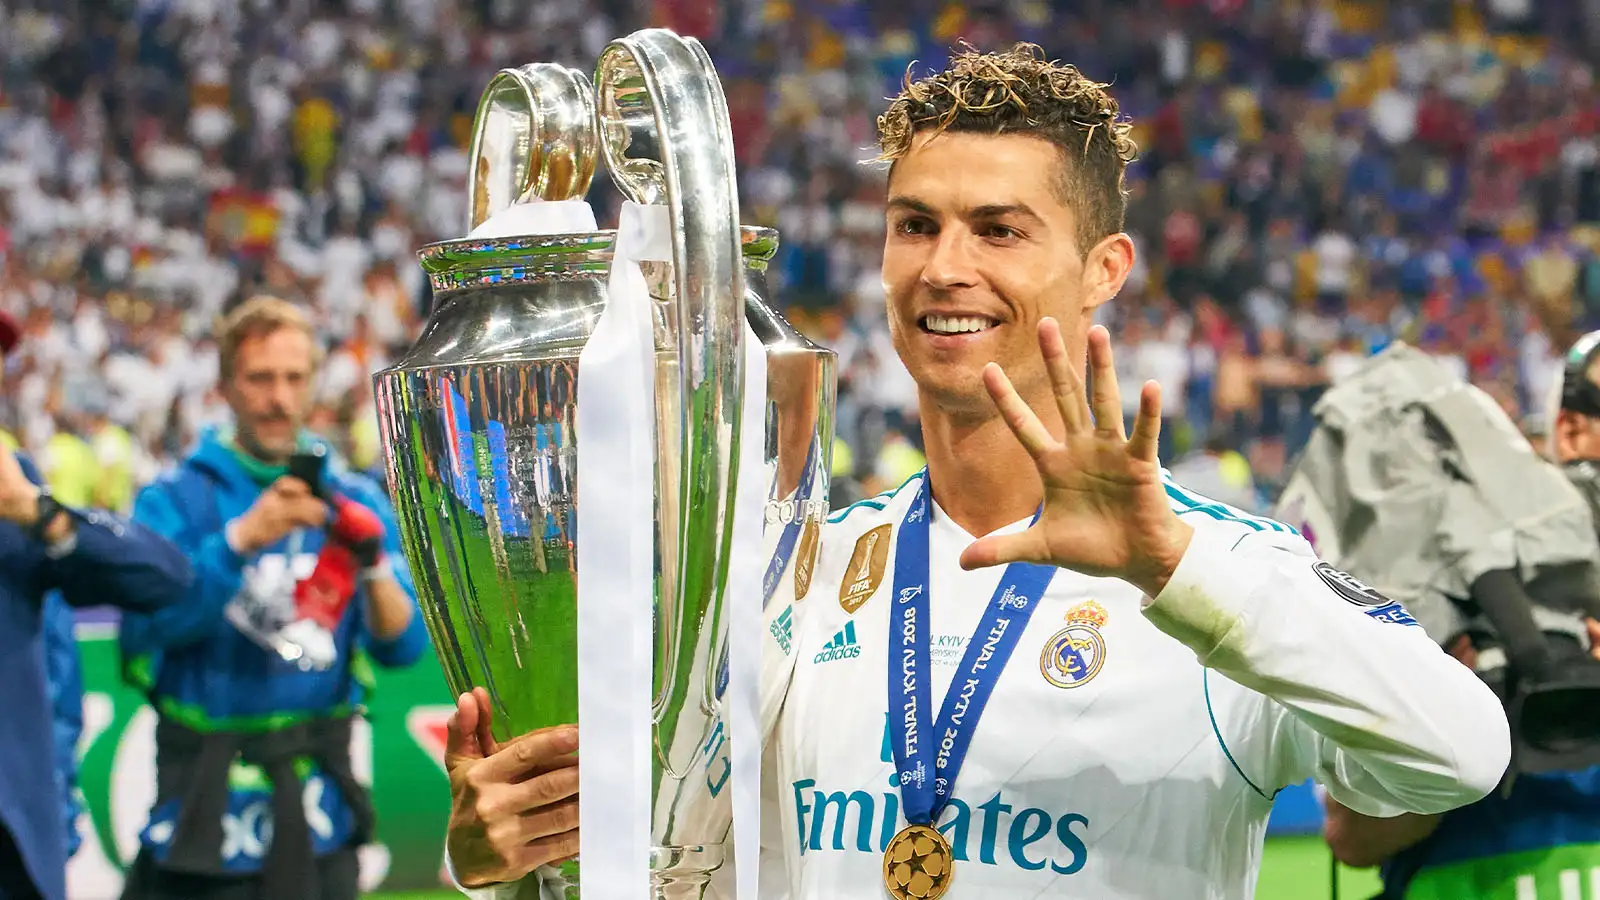 UEFA Champions League Finale, Soccer, Kiev, May 26, 2018 Cristiano RONALDO, Real Madrid 7 celebration 5th title with trophy REAL MADRID - FC LIVERPOOL 3-1 Fussball UEFA Champions League, Final, Kiev, Ukraine, May 26, 2018